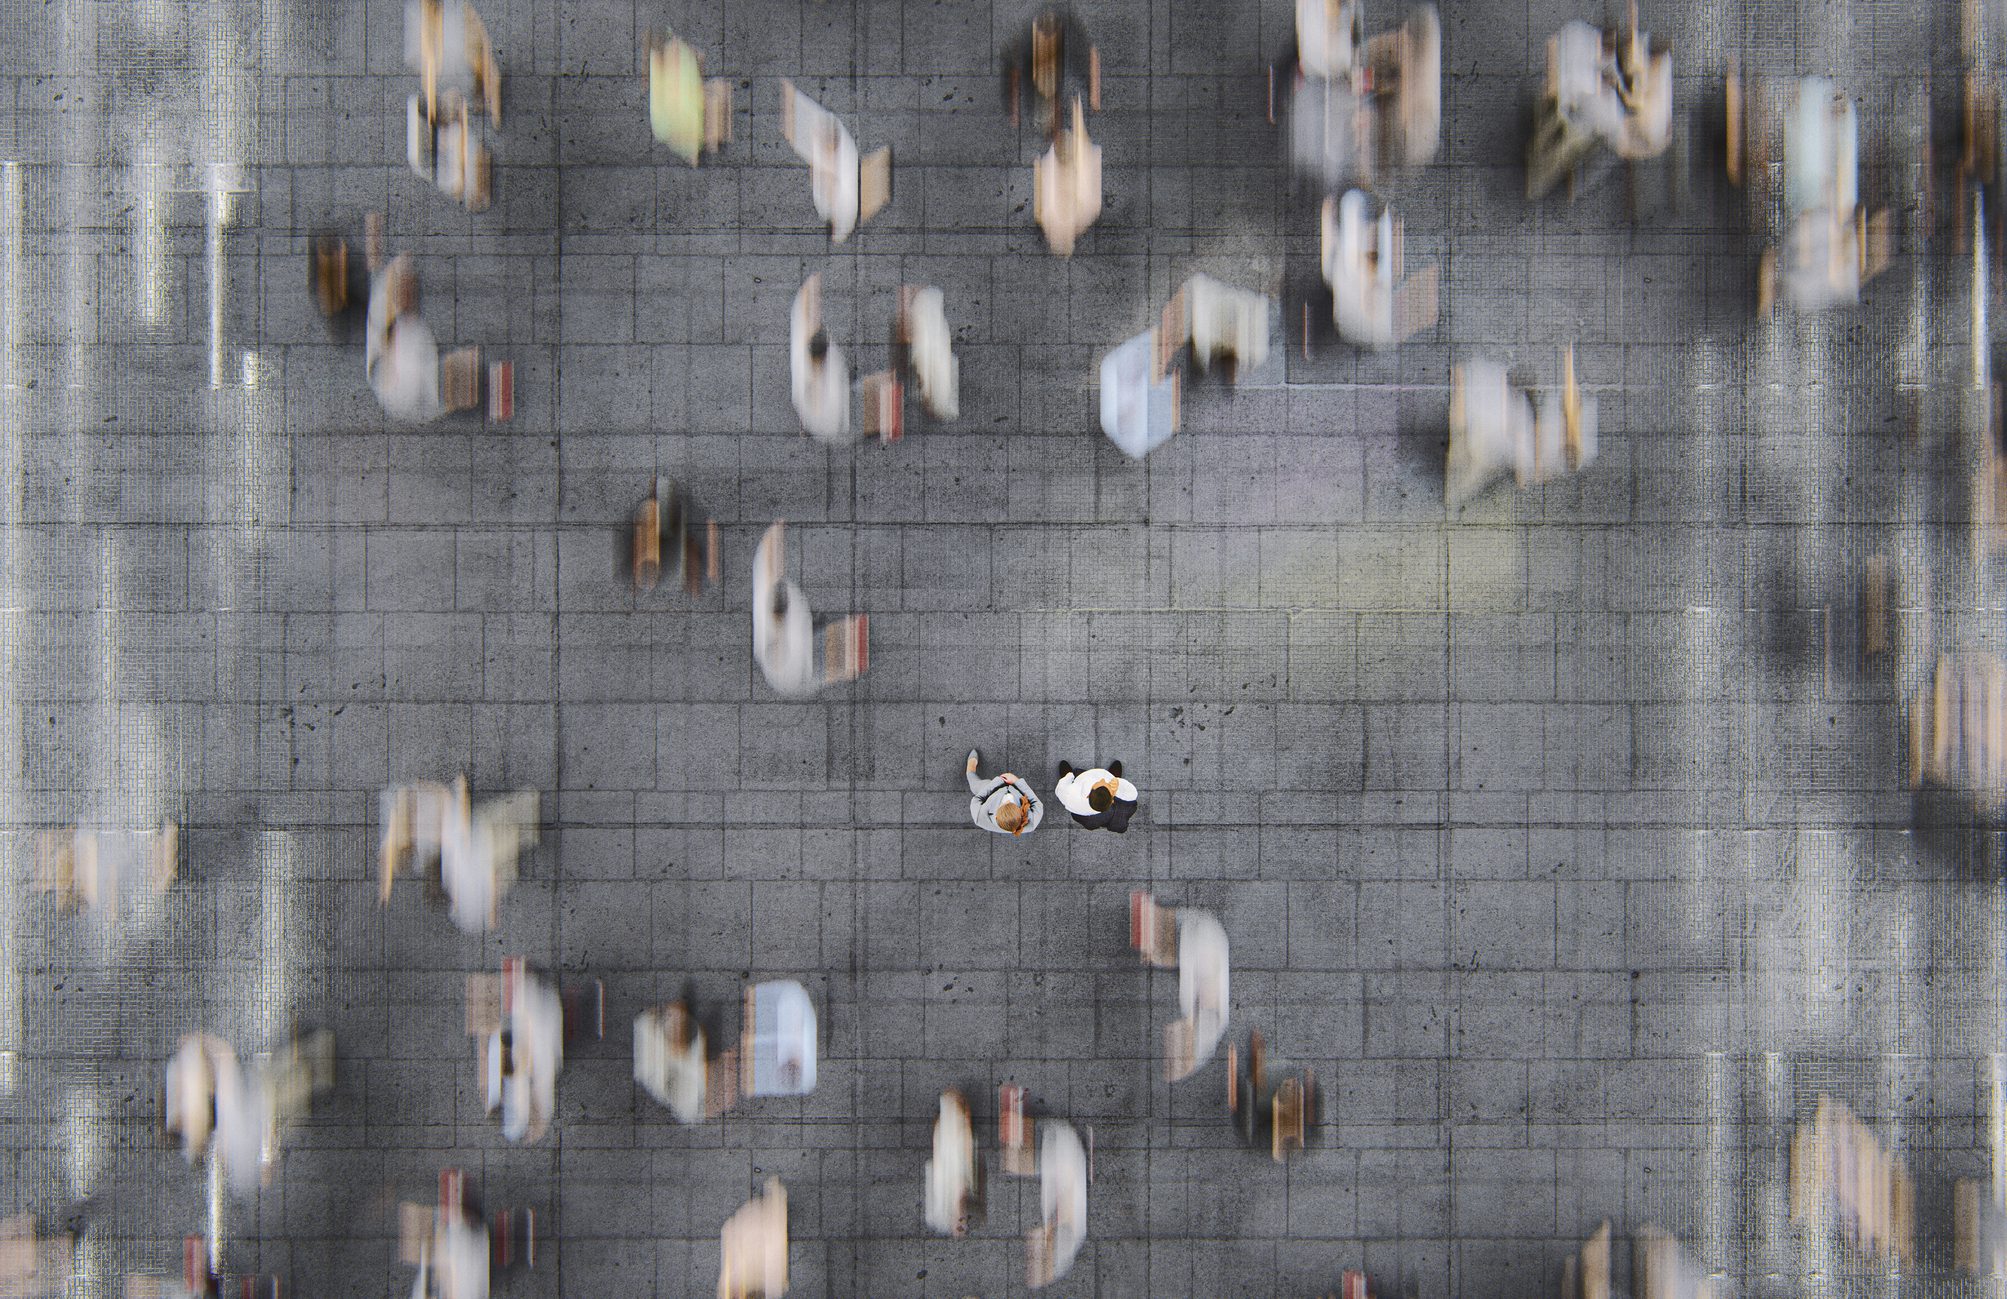 Intentionally blurred image shows a fast-moving crowd of commuters with two people standing in the middle